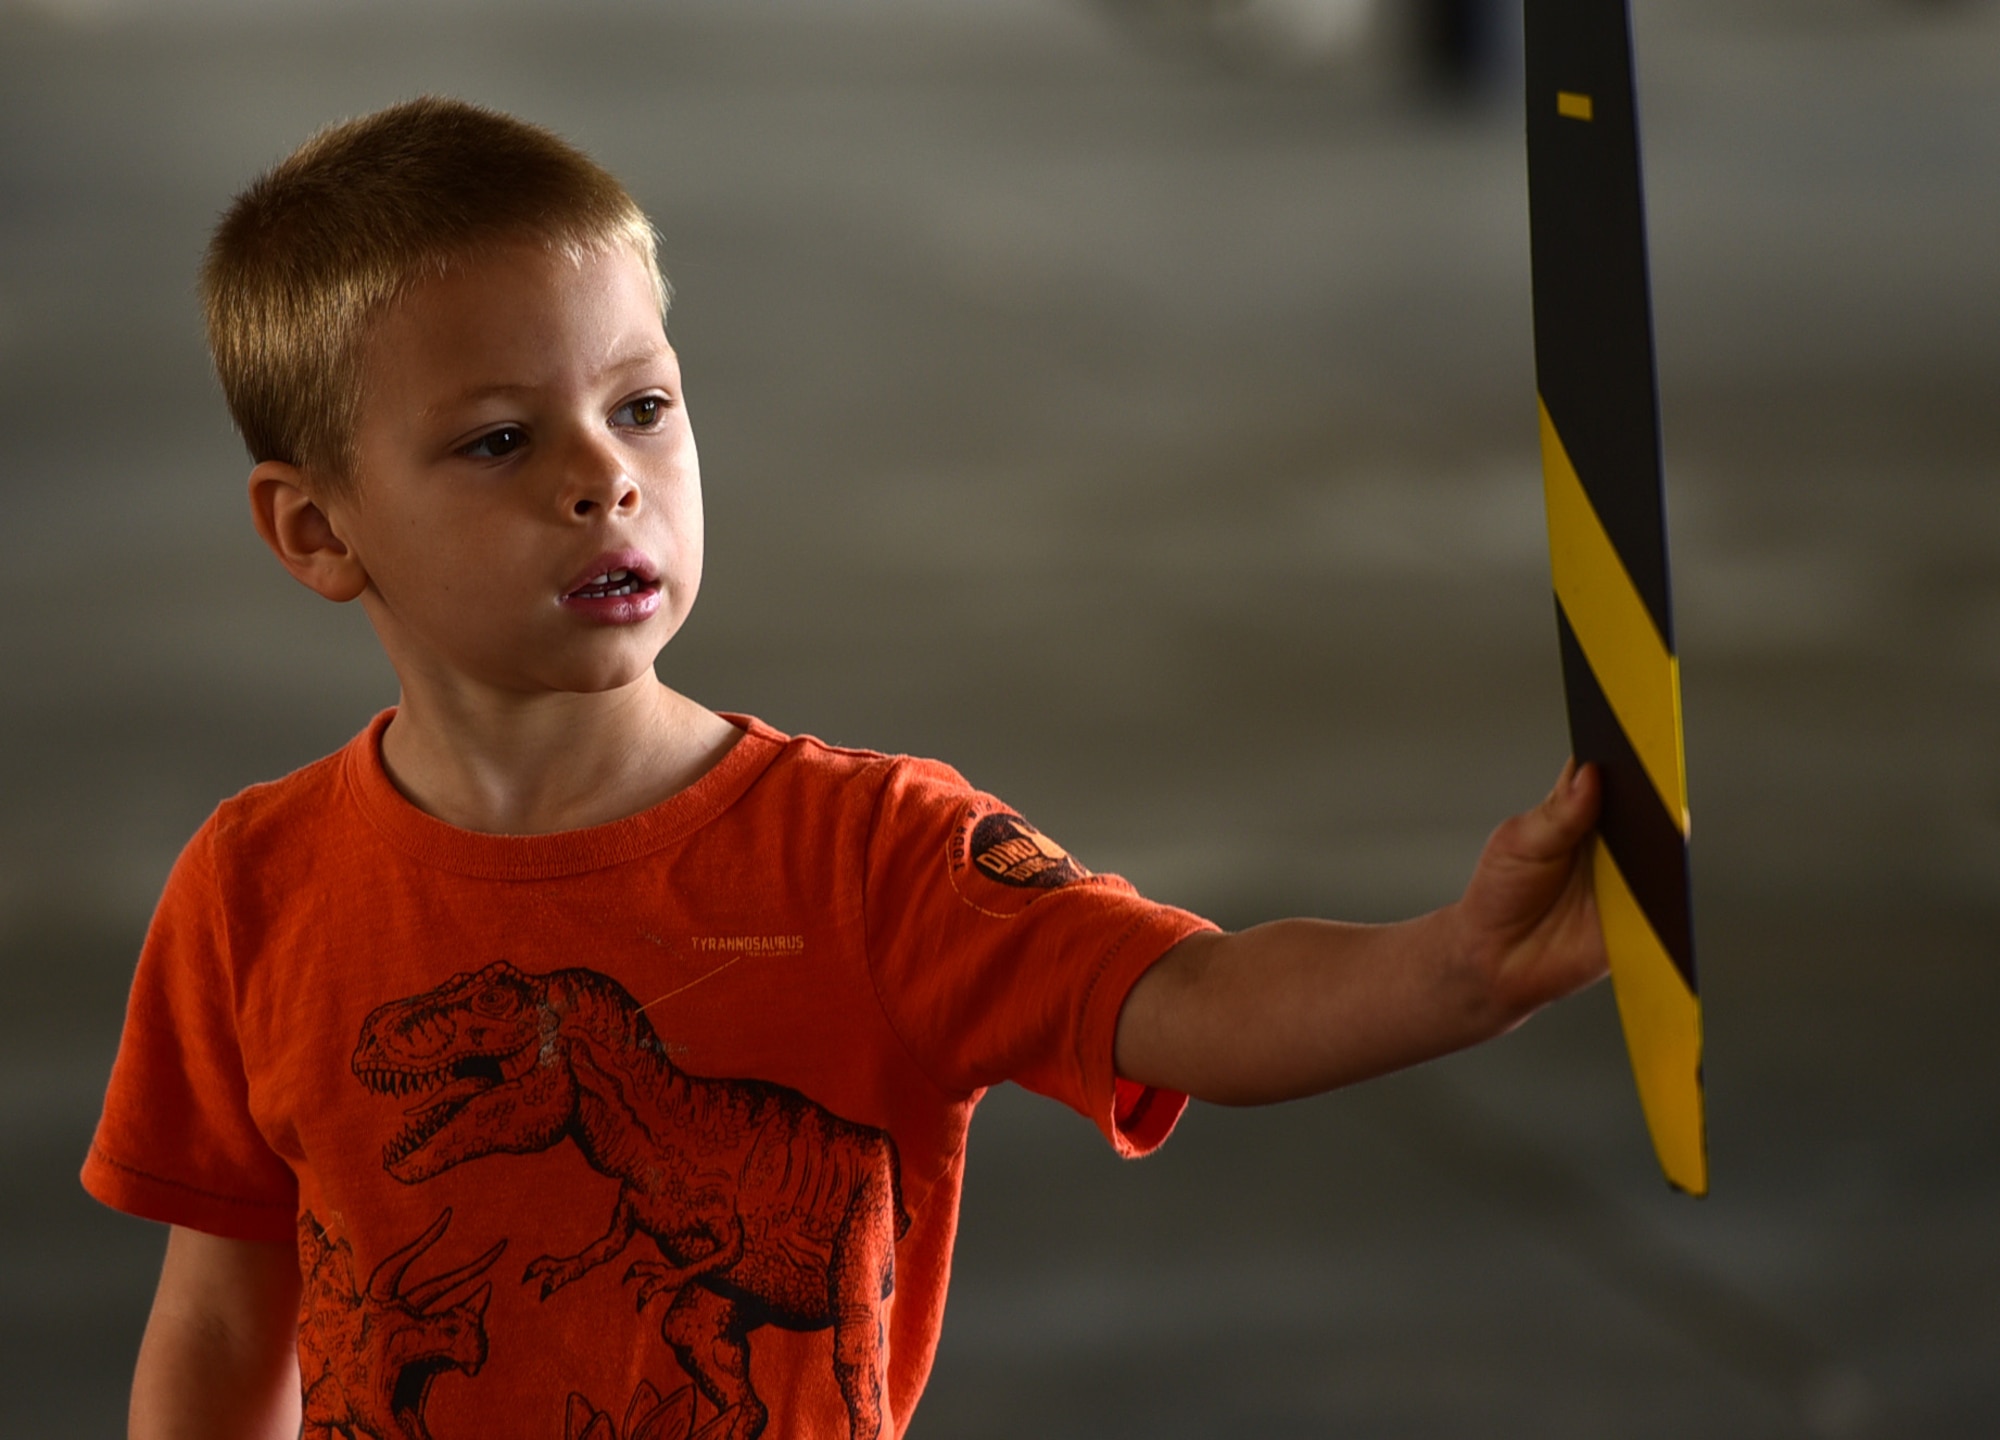 Damian Kemp, five, son of Tech. Sgt. Roger Kemp, 628th Civil Engineering Squadron fire fighter, inspects the propeller of an MQ-9 Reaper April 27, 2018, at the Joint Base Charleston Air & Space Expo at JB Charleston, S.C. During the event, spectators received an up-close and personal look at the Reaper and interacted with the crews who fly, maintain and support the aircraft and its mission. (U.S. Air Force photo by Senior Airman Christian Clausen)